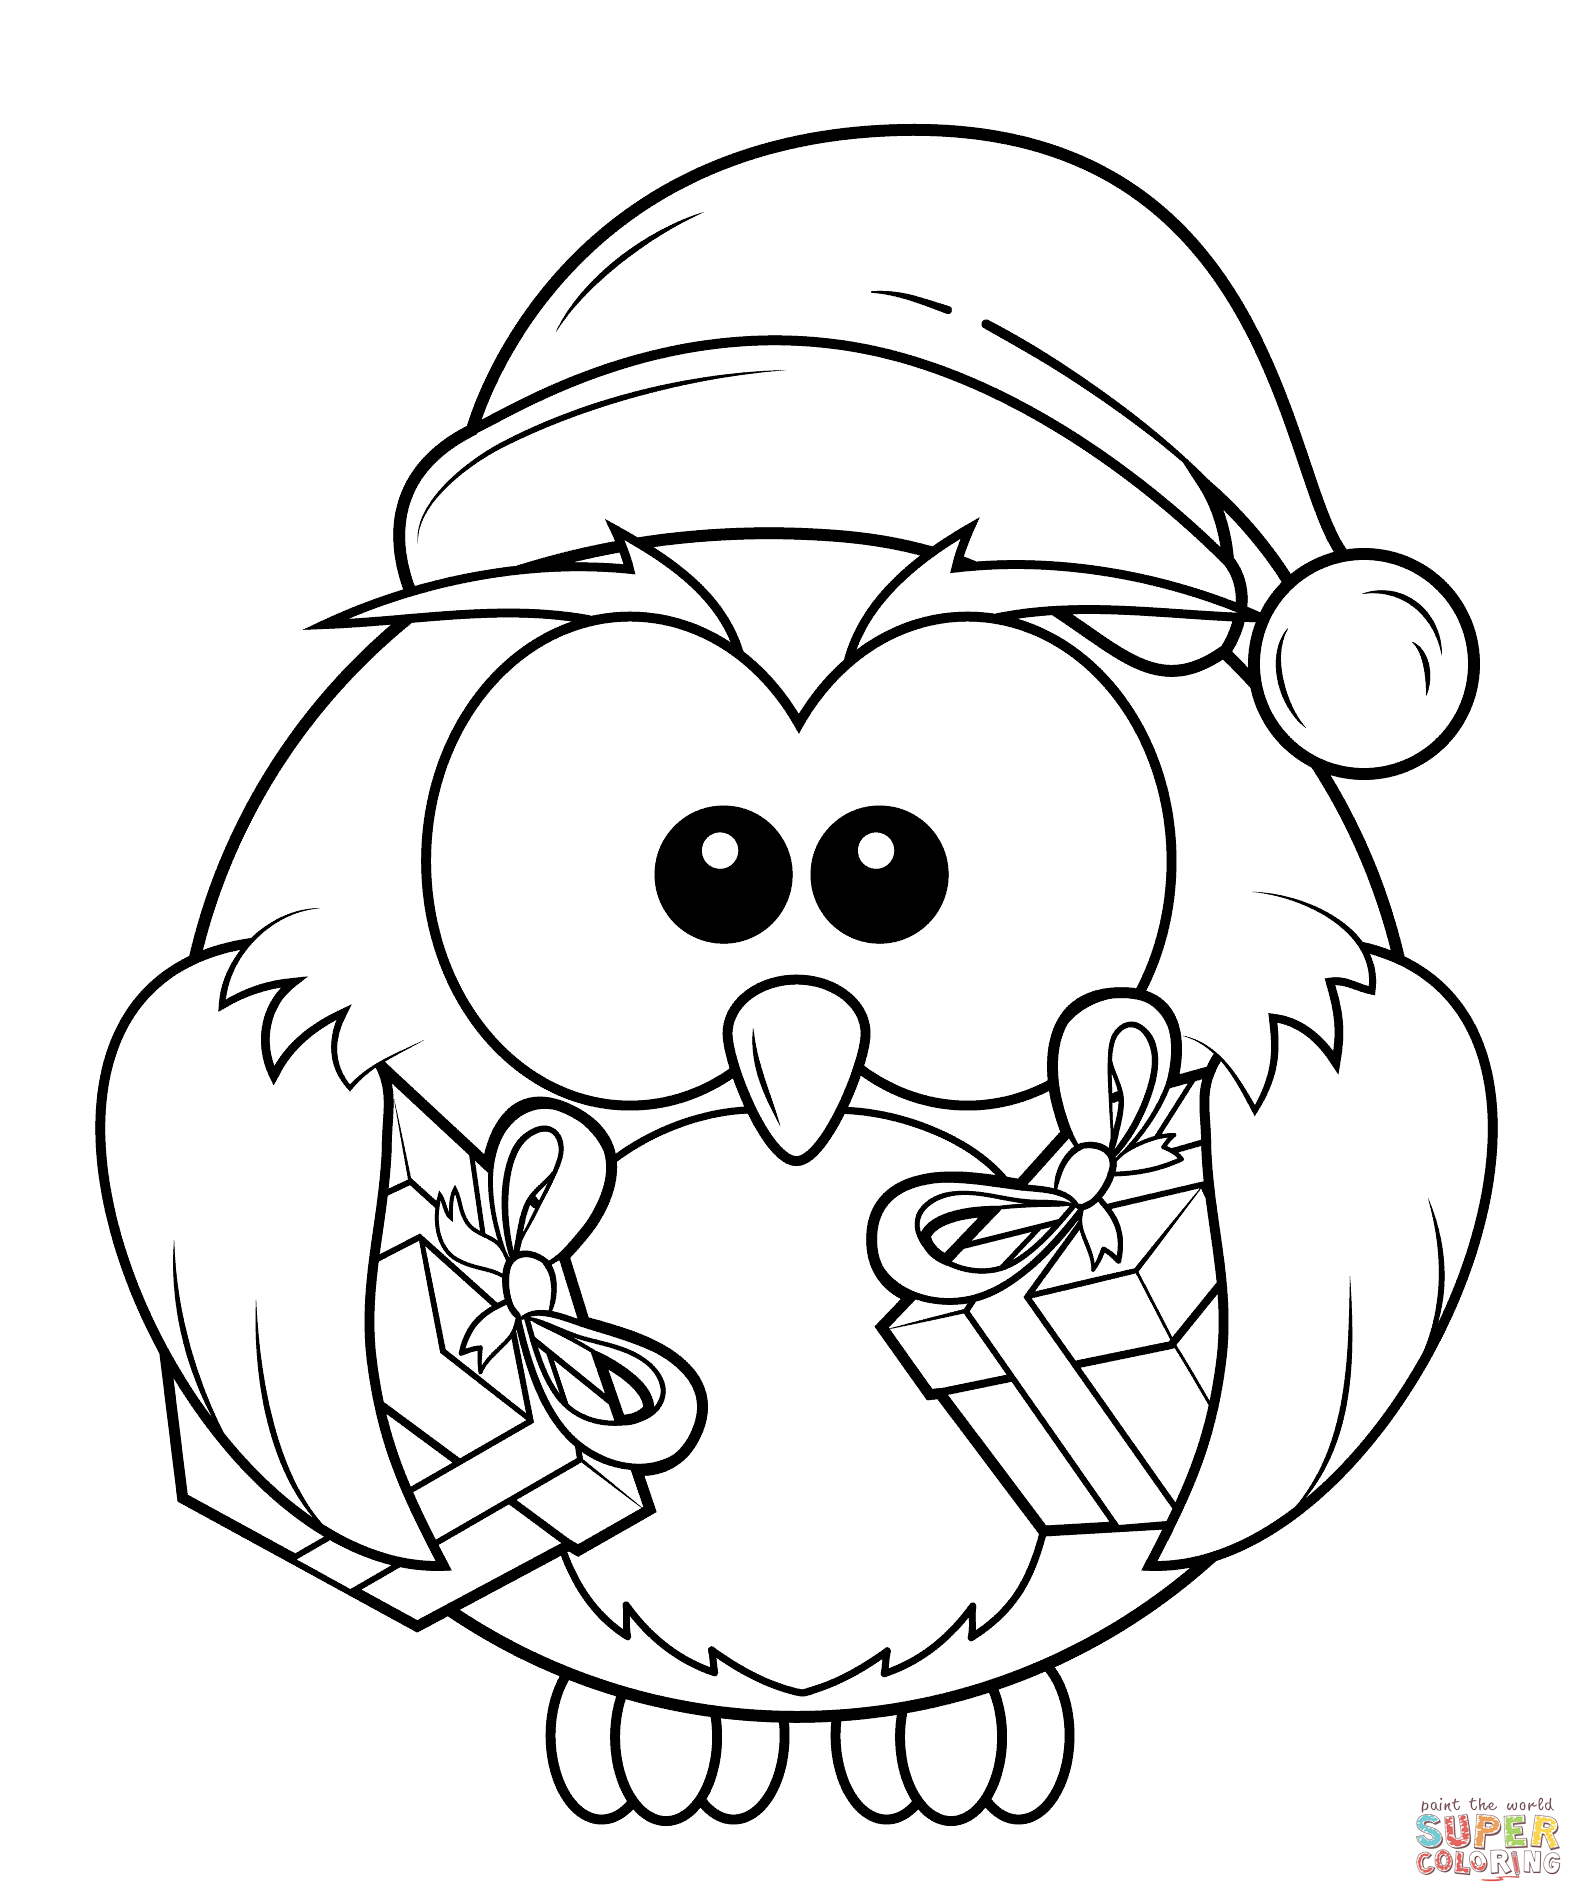 Owl Cartoon Coloring Pages at GetDrawings Free download